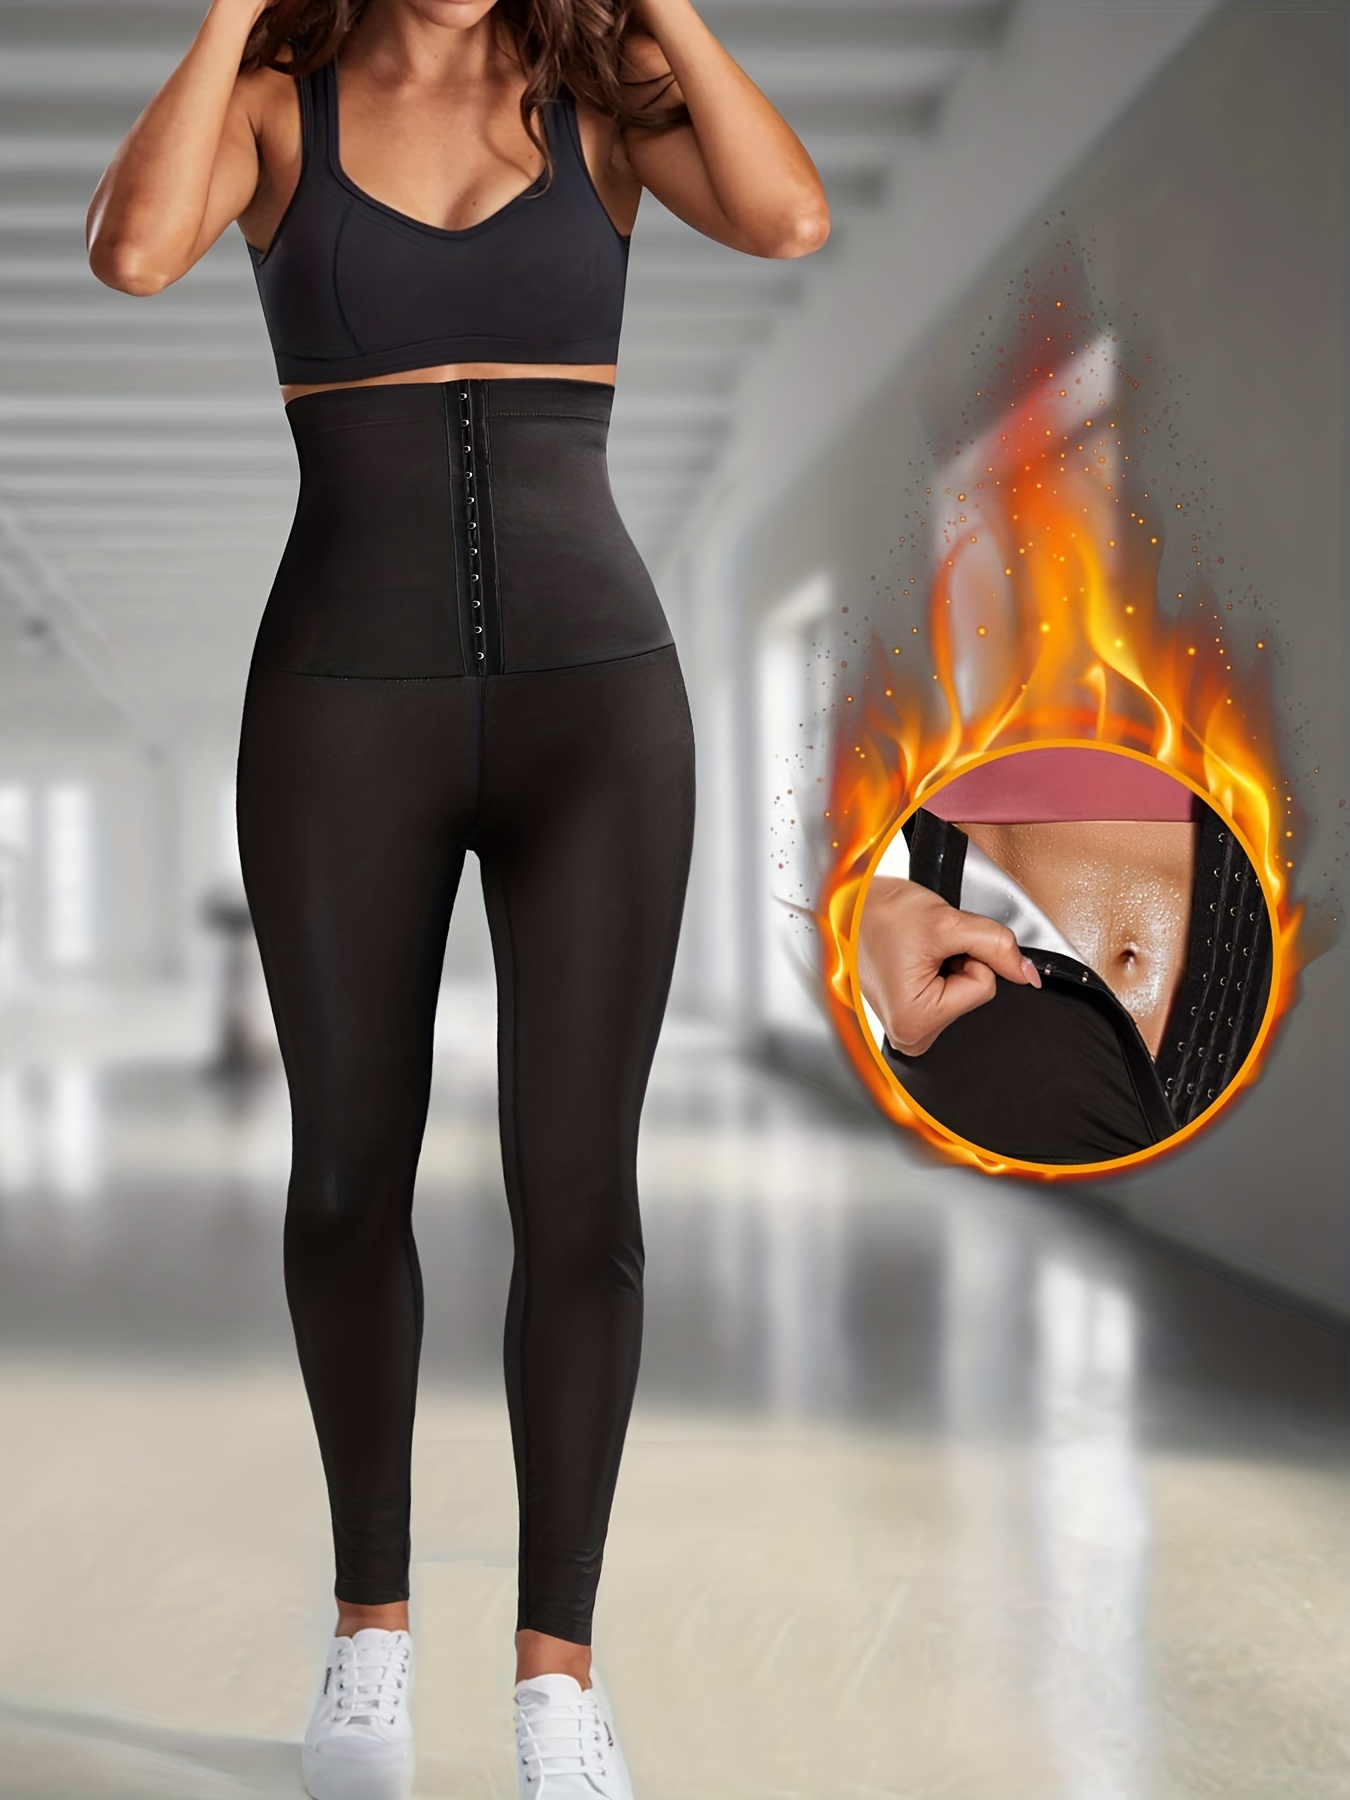 Sauna Leggings for Women Sweat Pants High Waist Compression Slimming Hot  Thermo Workout Training Capris Body Shaper